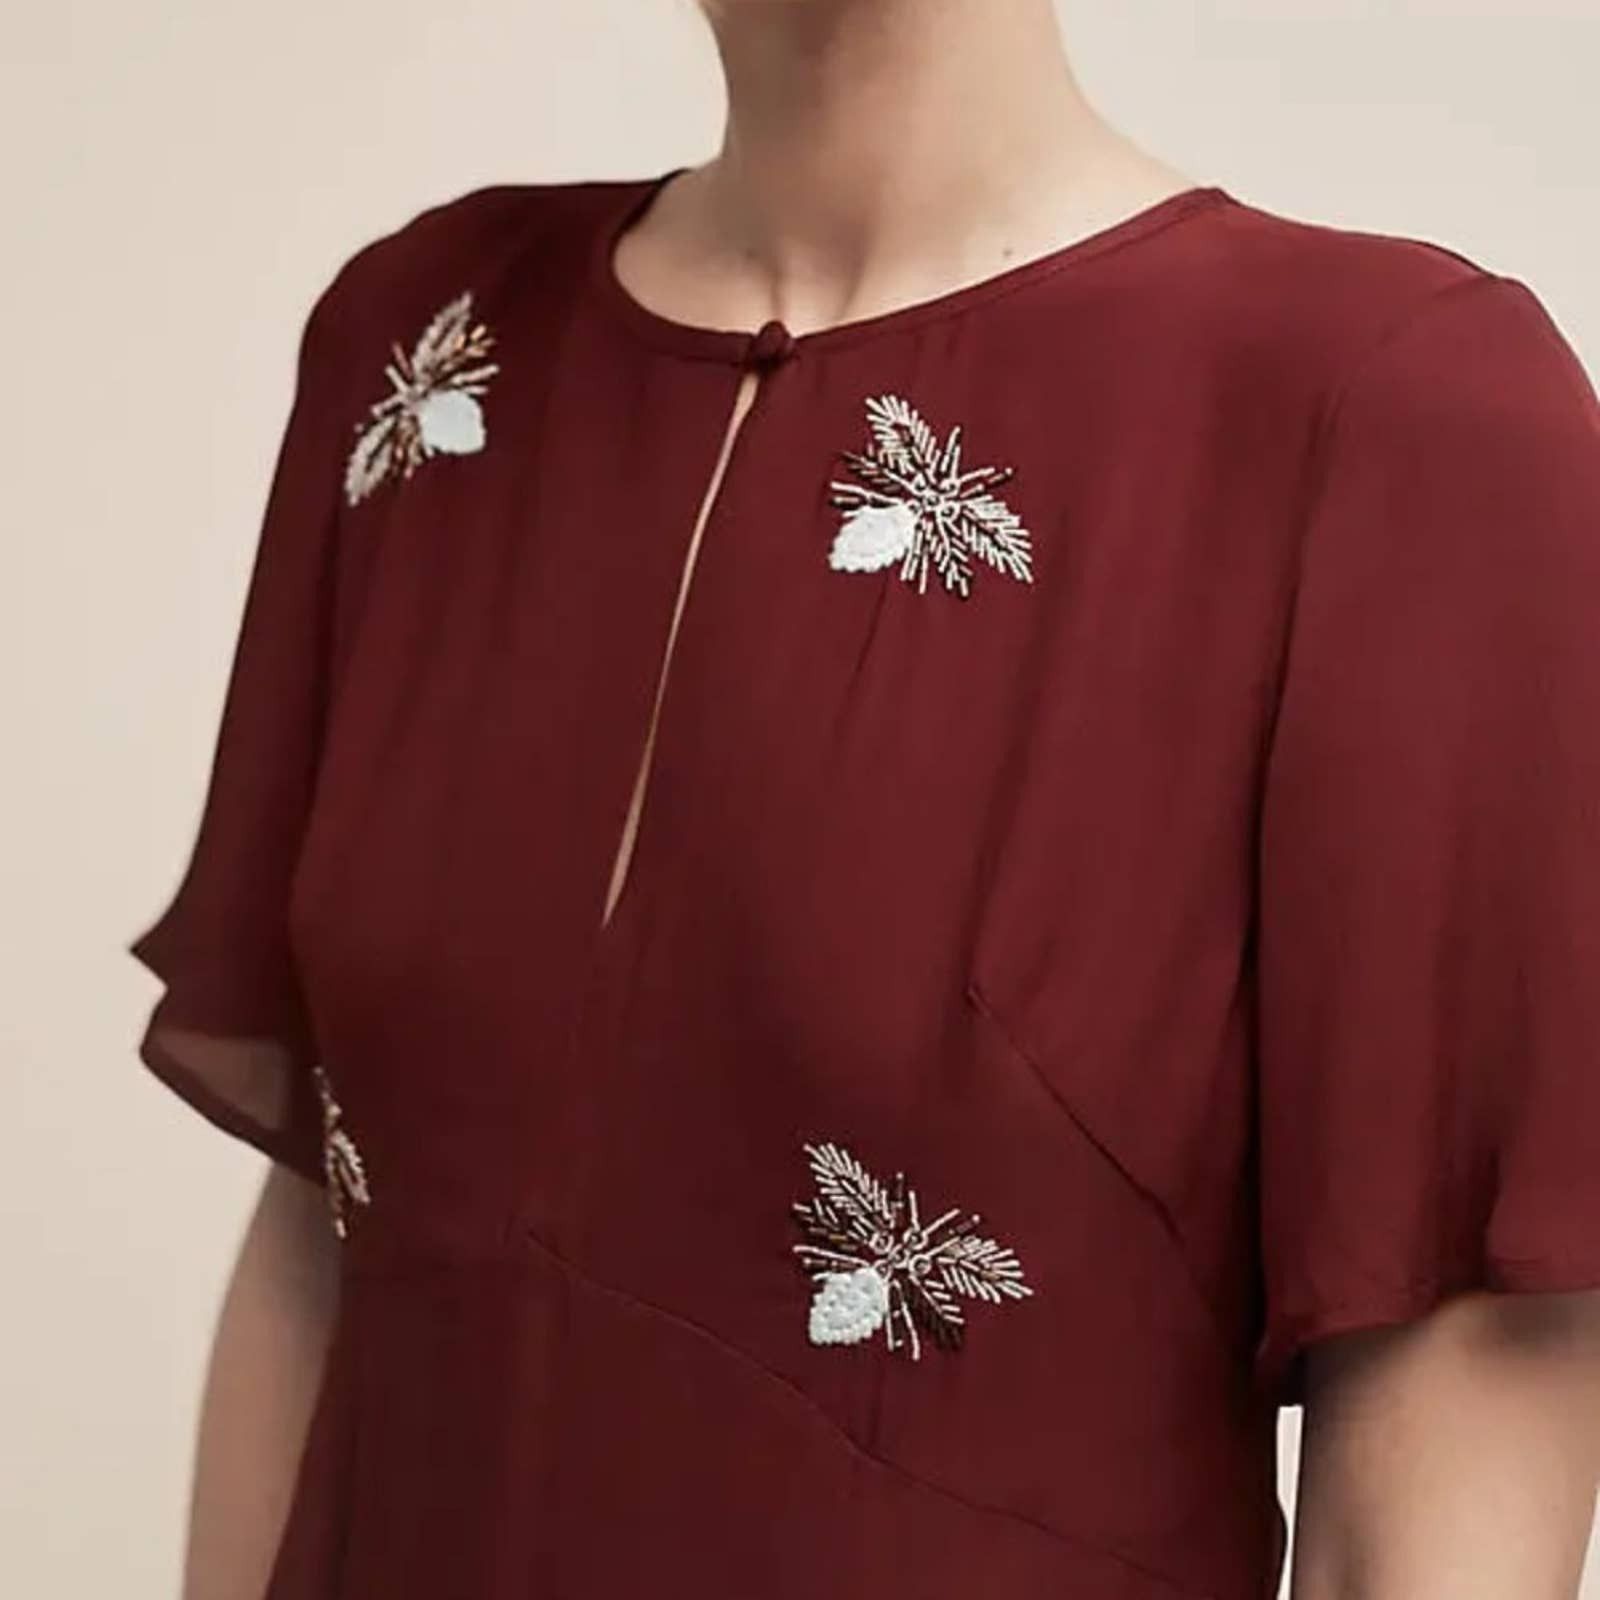 Anthropologie Anthropologi Moulinette Soeurs Burgundy Beaded Firefly Dress Size XS / US 0-2 / IT 36-38 - 2 Preview